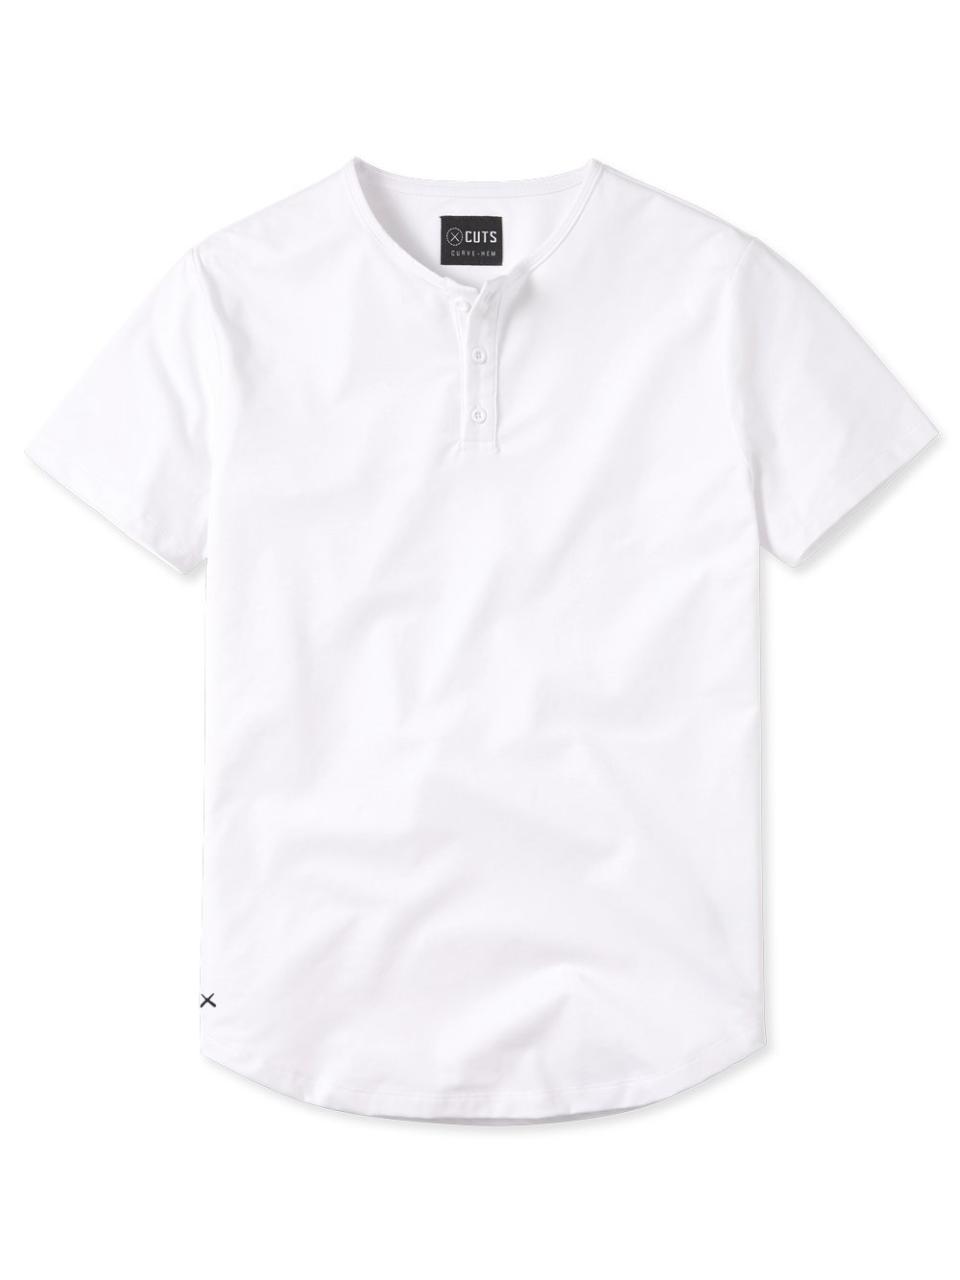 white henley shirt from cuts clothing